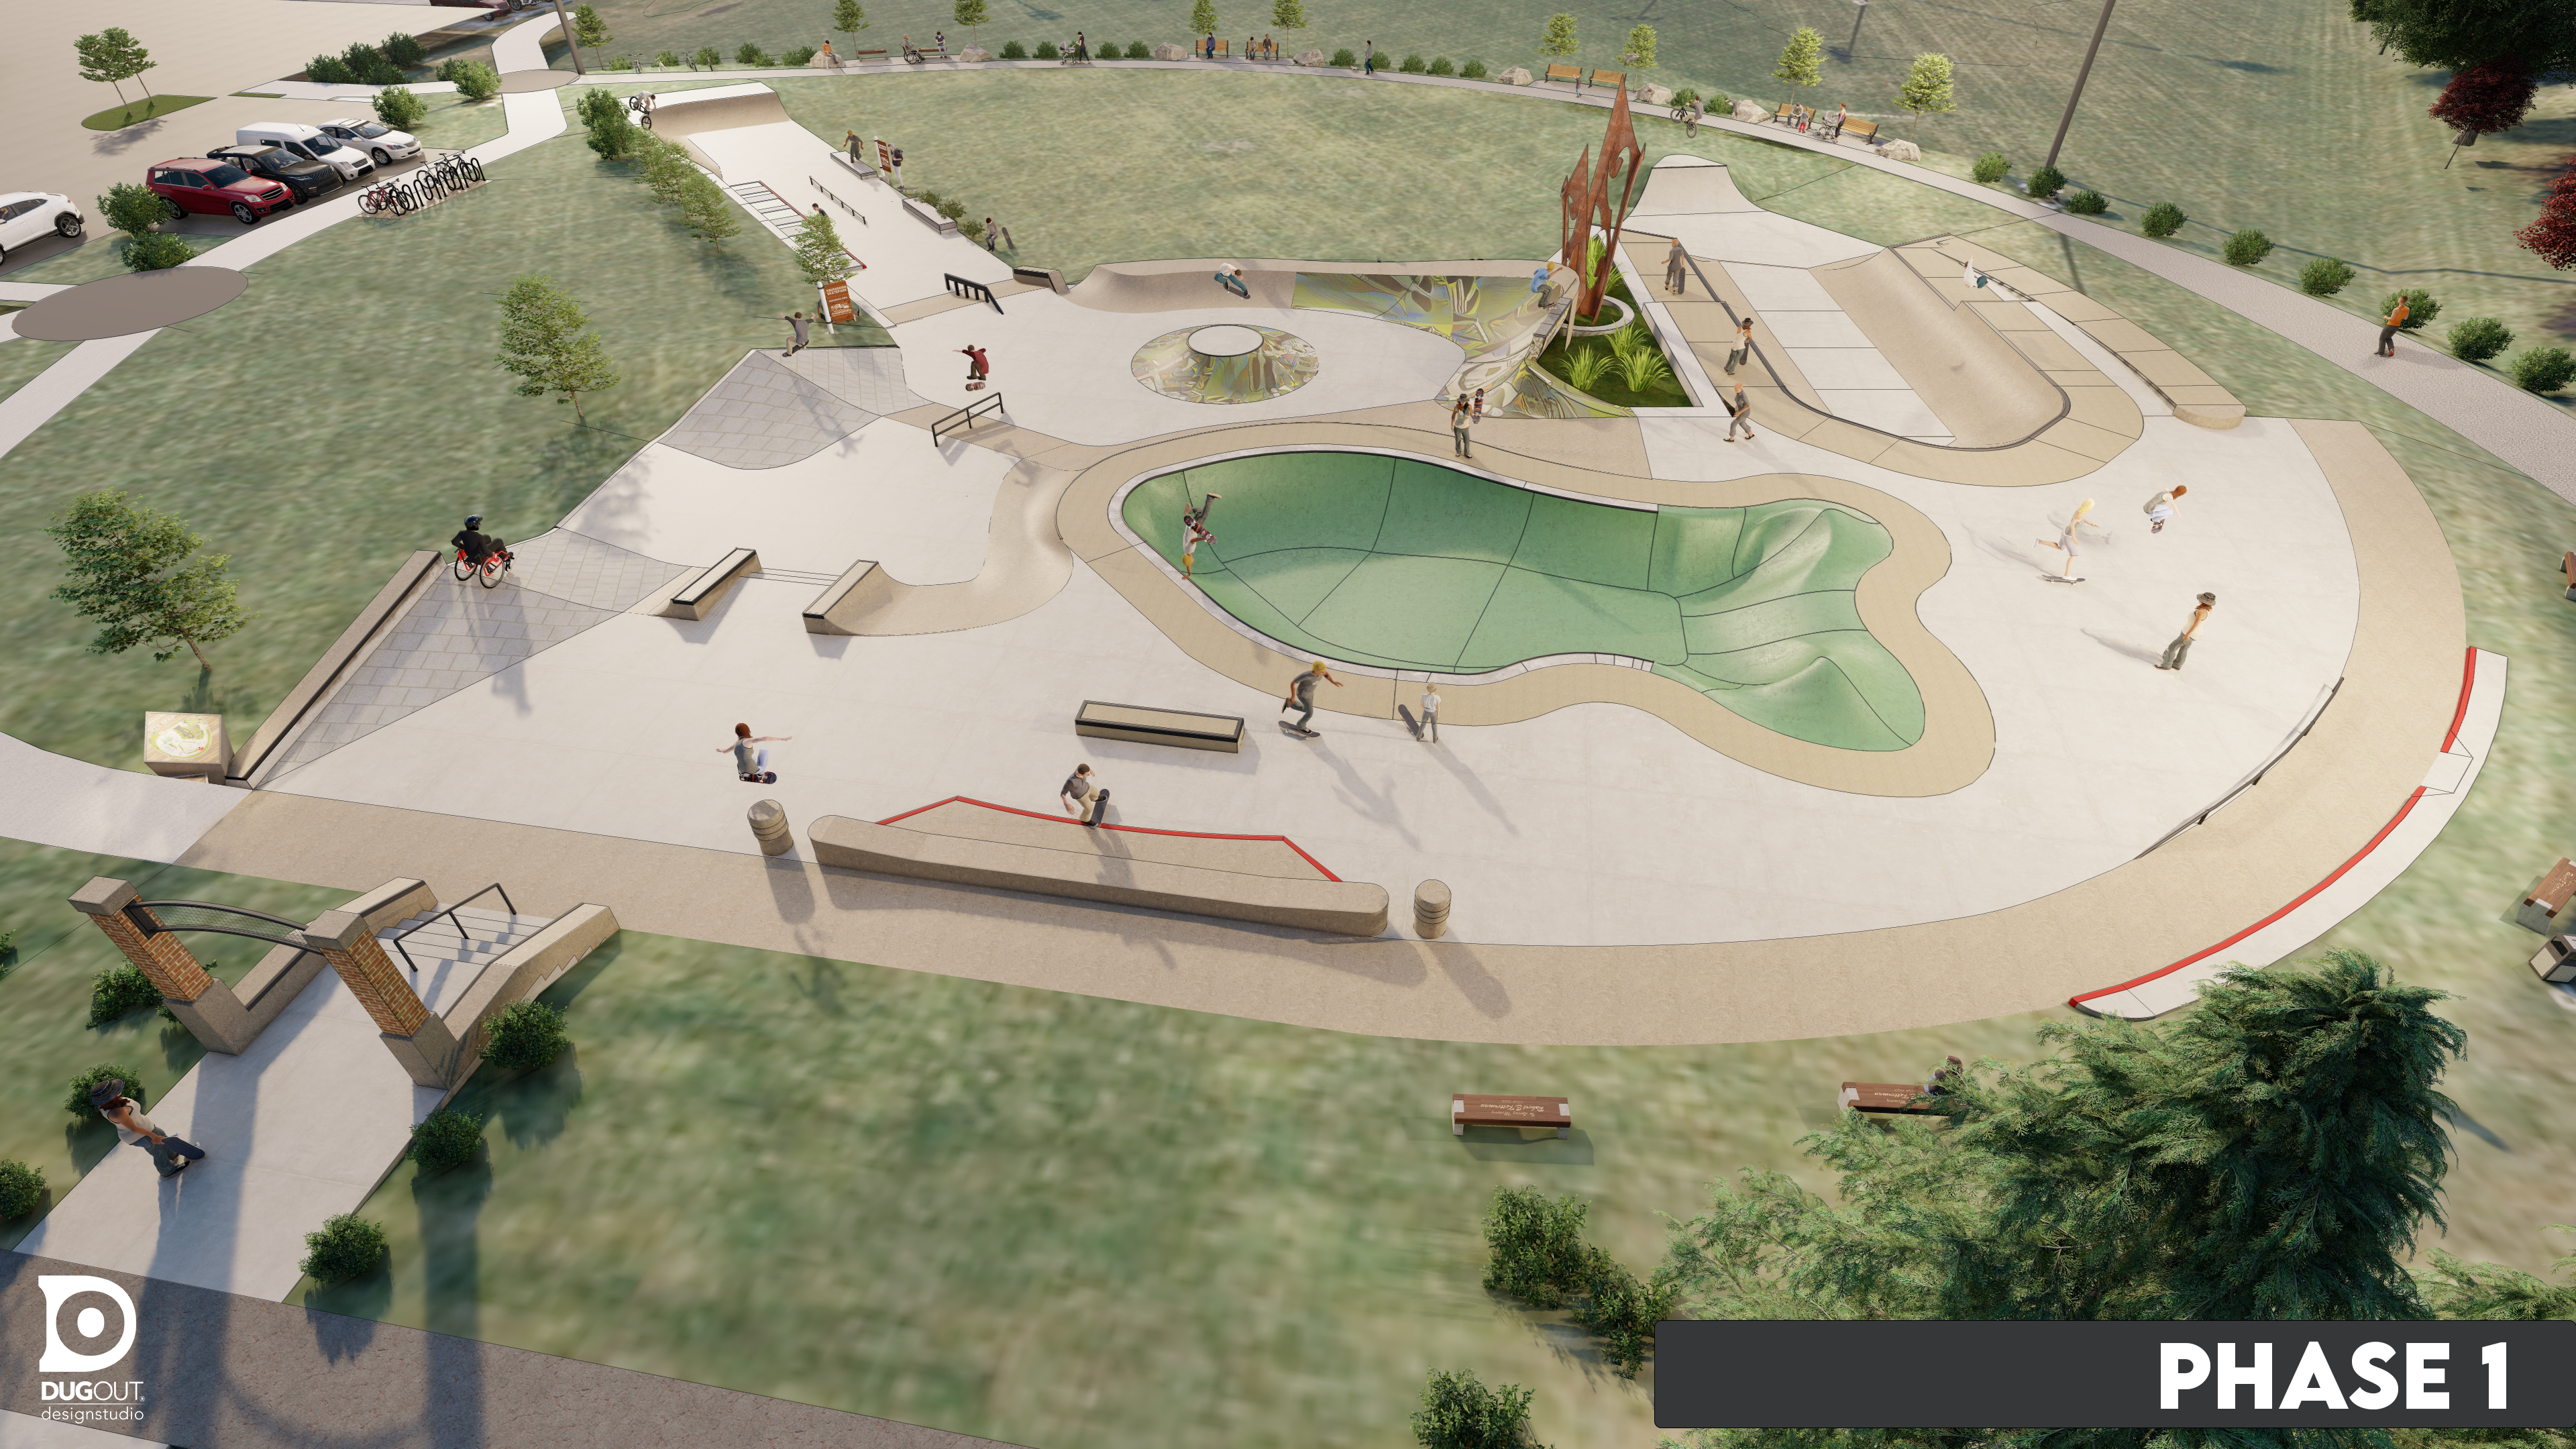 Site engineering & surveying at the new Valpo skate park